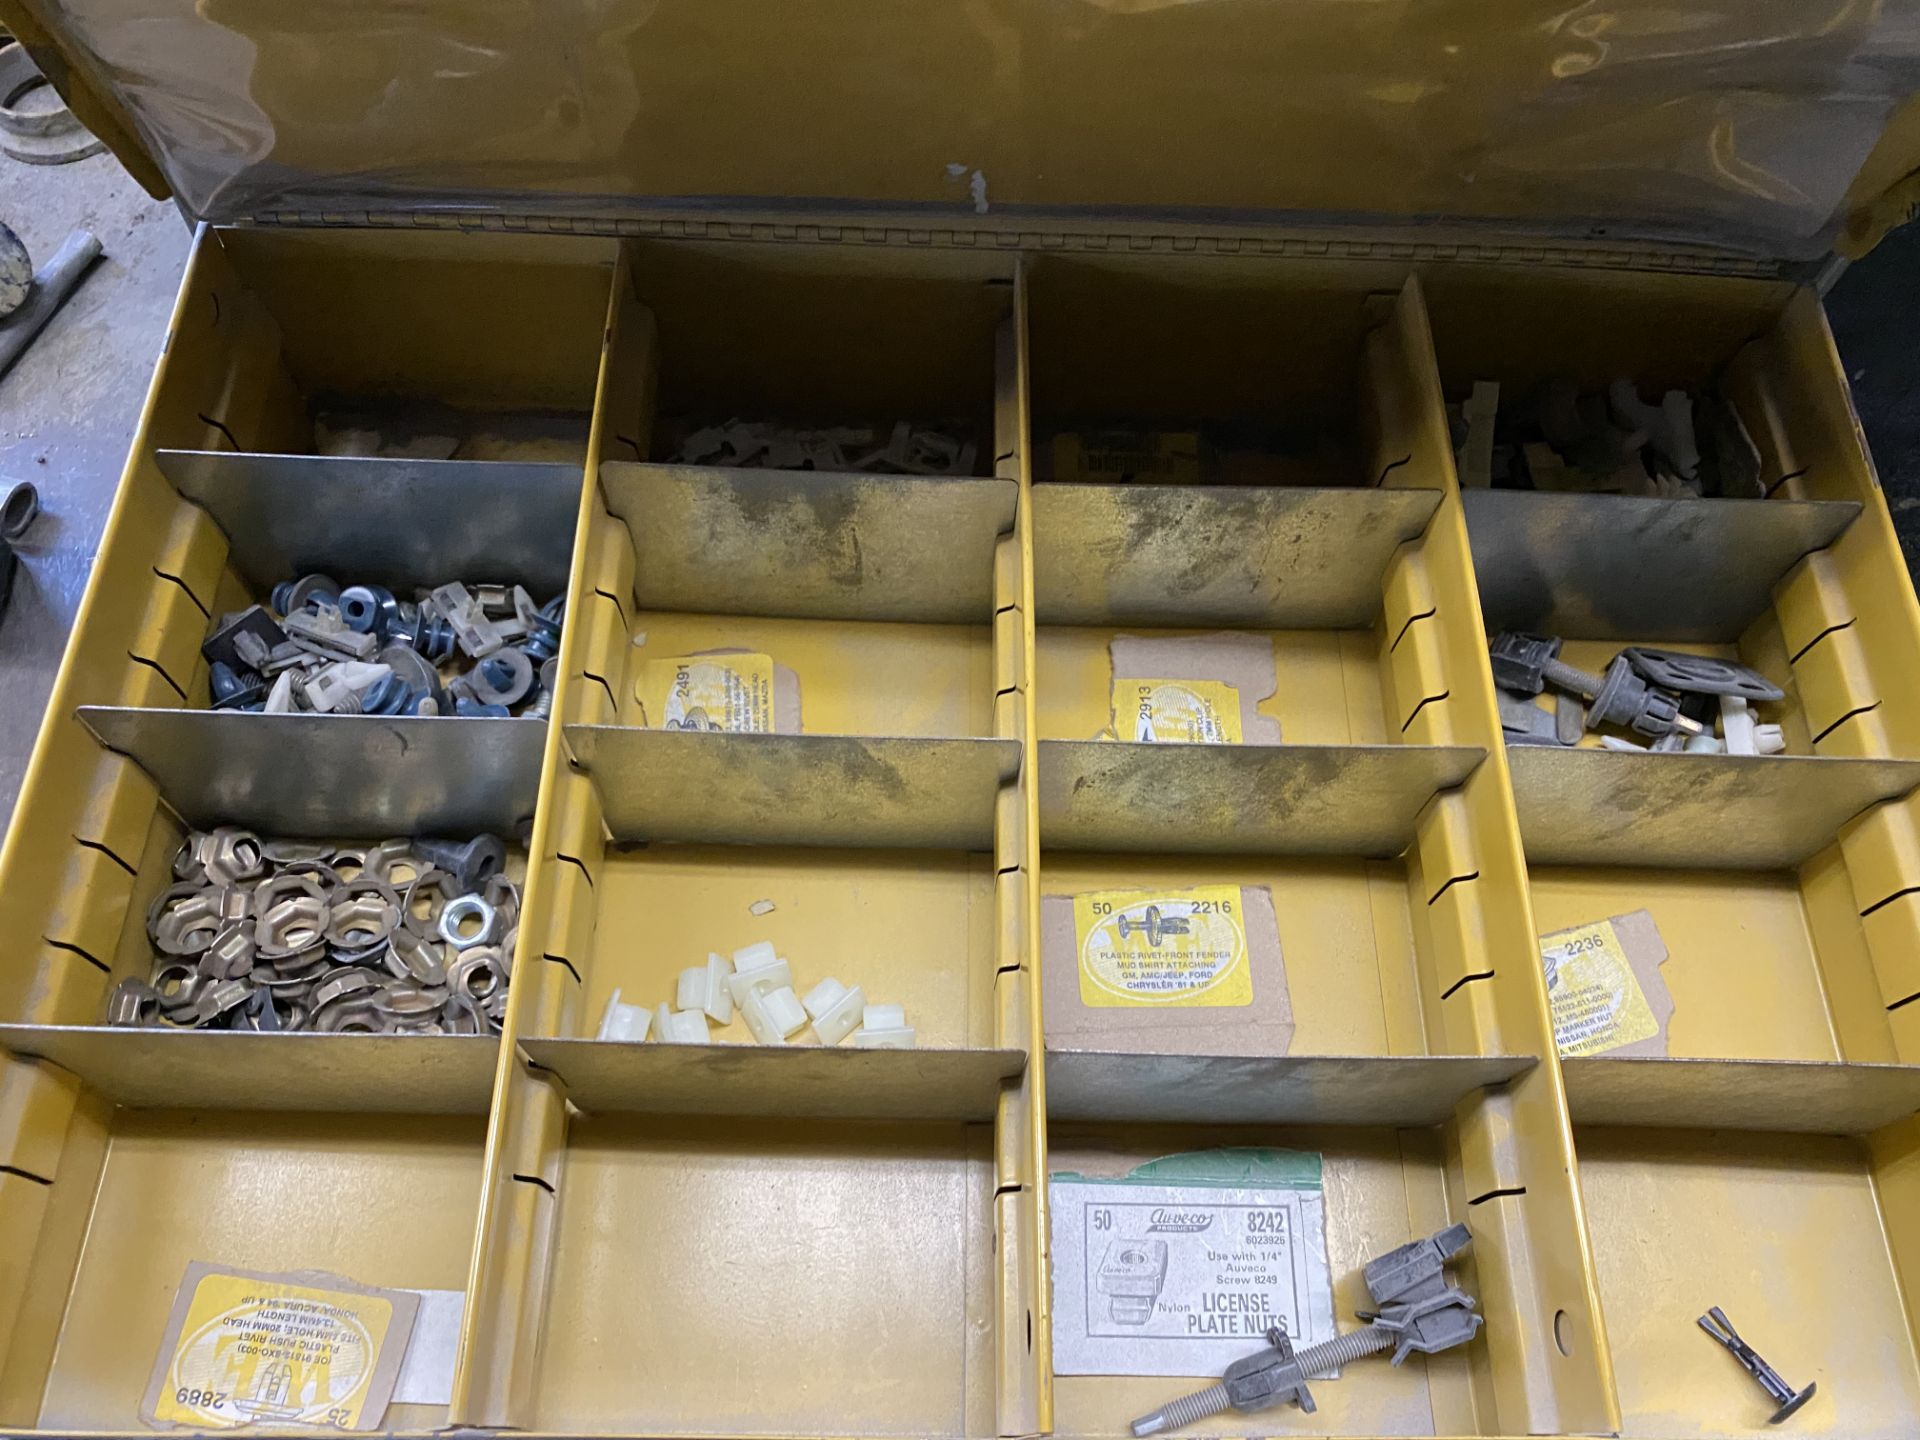 {LOT} Asst. Kits w/Hardware, Bulbs, Body Panel Fasteners, With Cabinets Etc. - Image 23 of 25